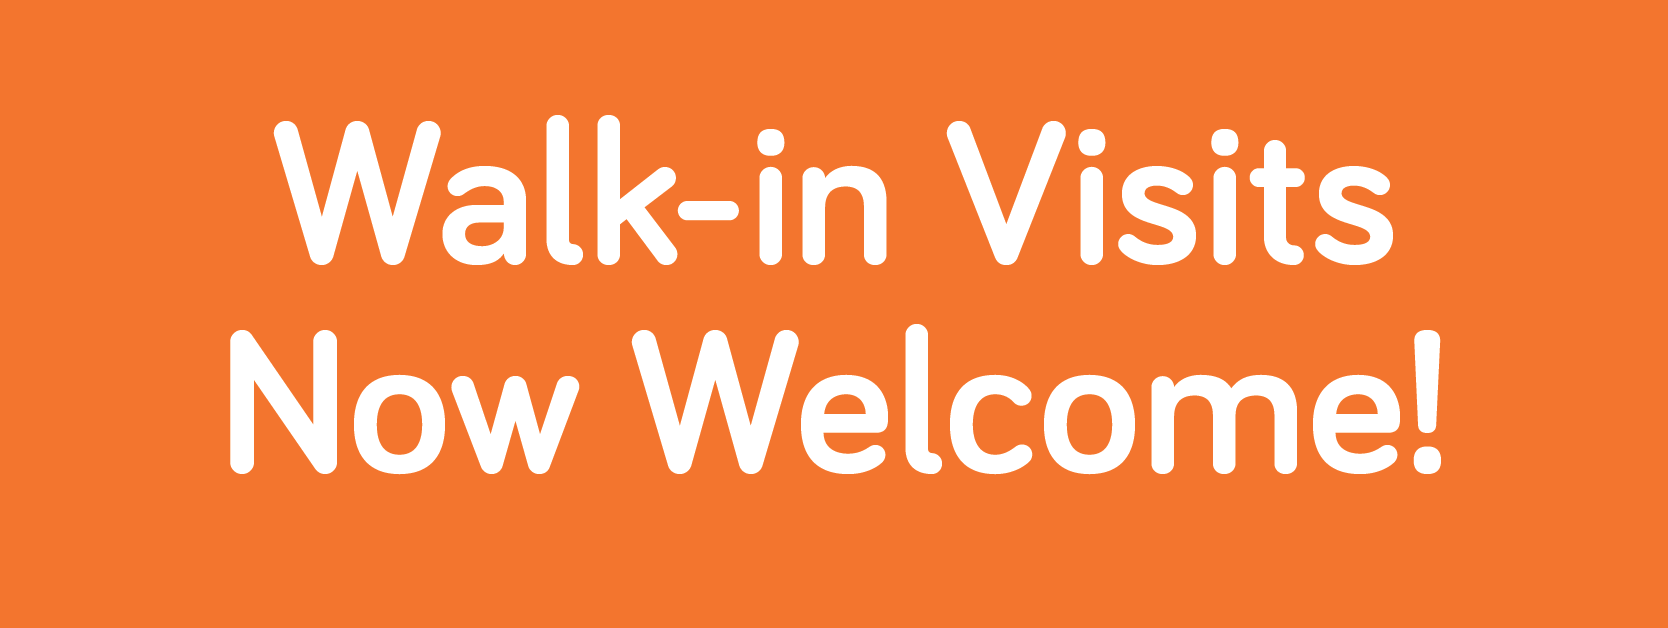 banner that reads Walk-in Visits Now Welcome!